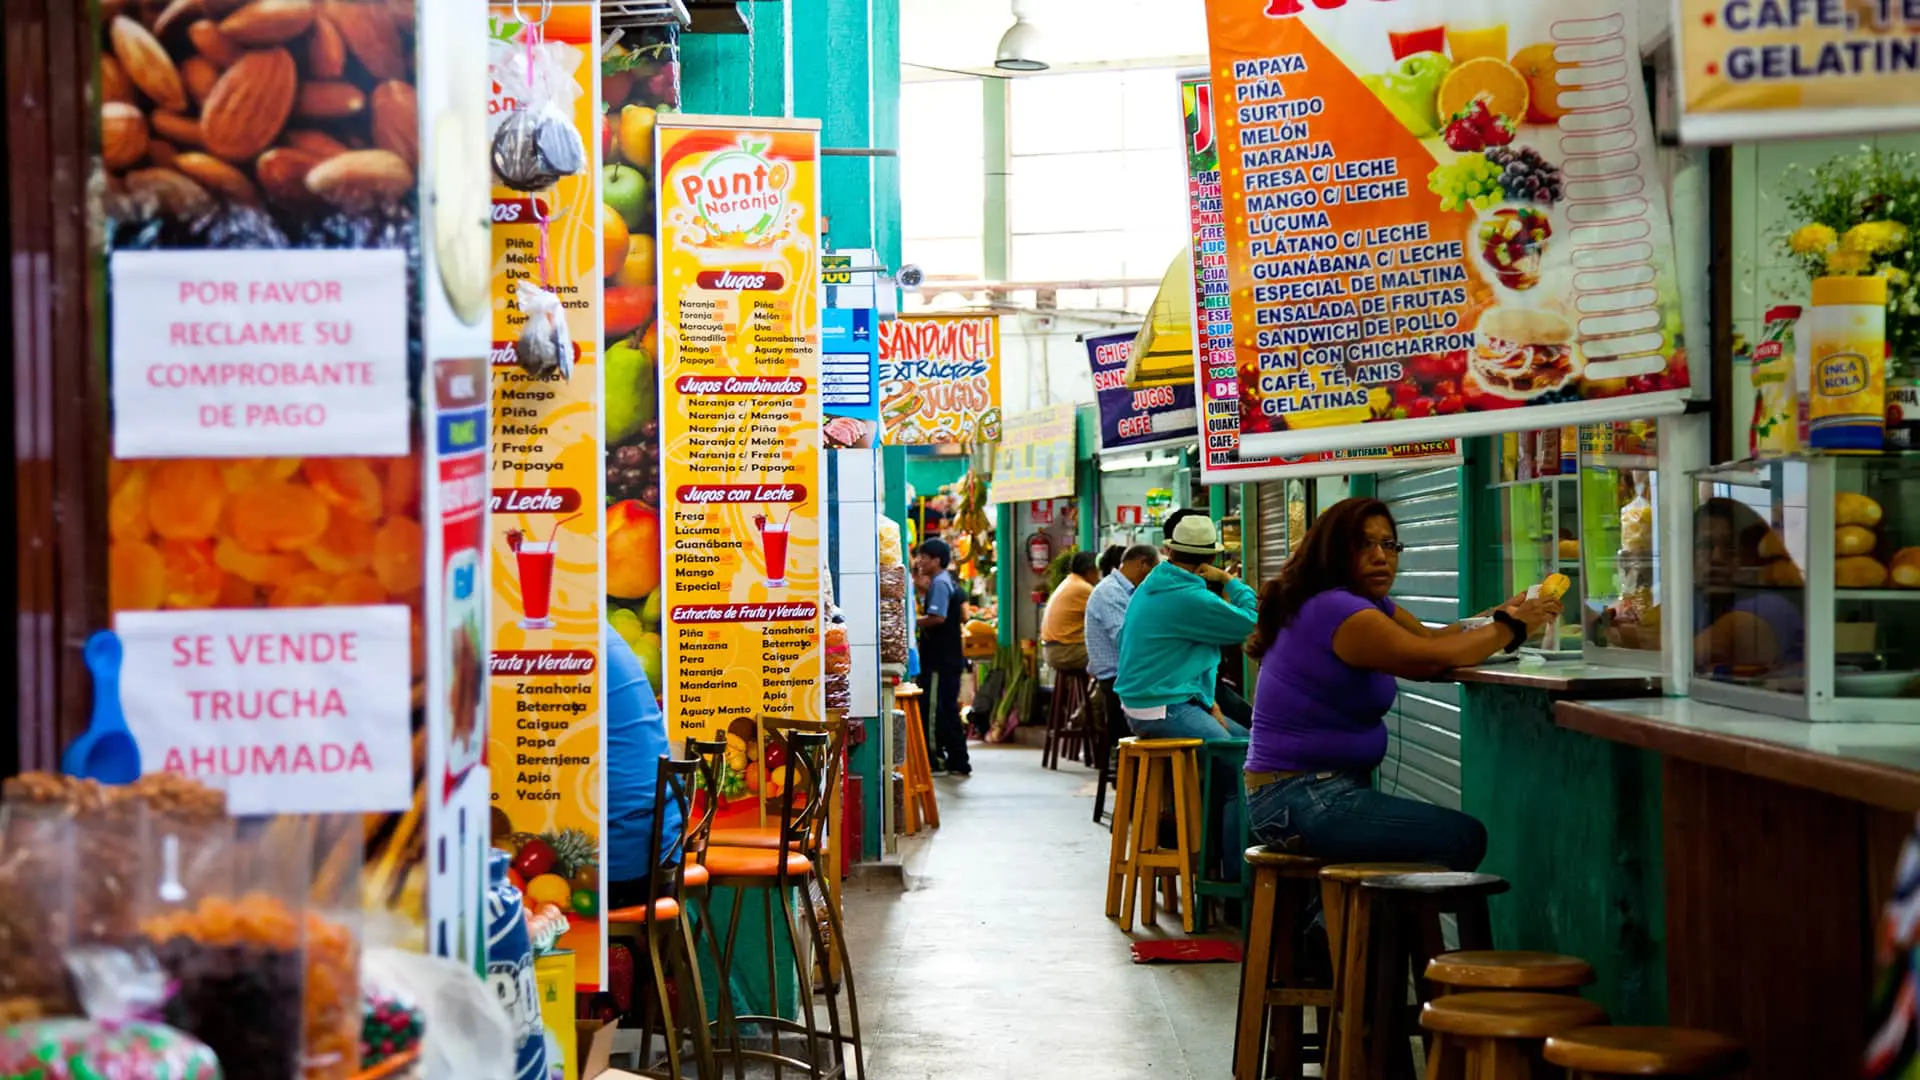 The market juices hall is colorful and busy at all times | Responsible Travel Peru